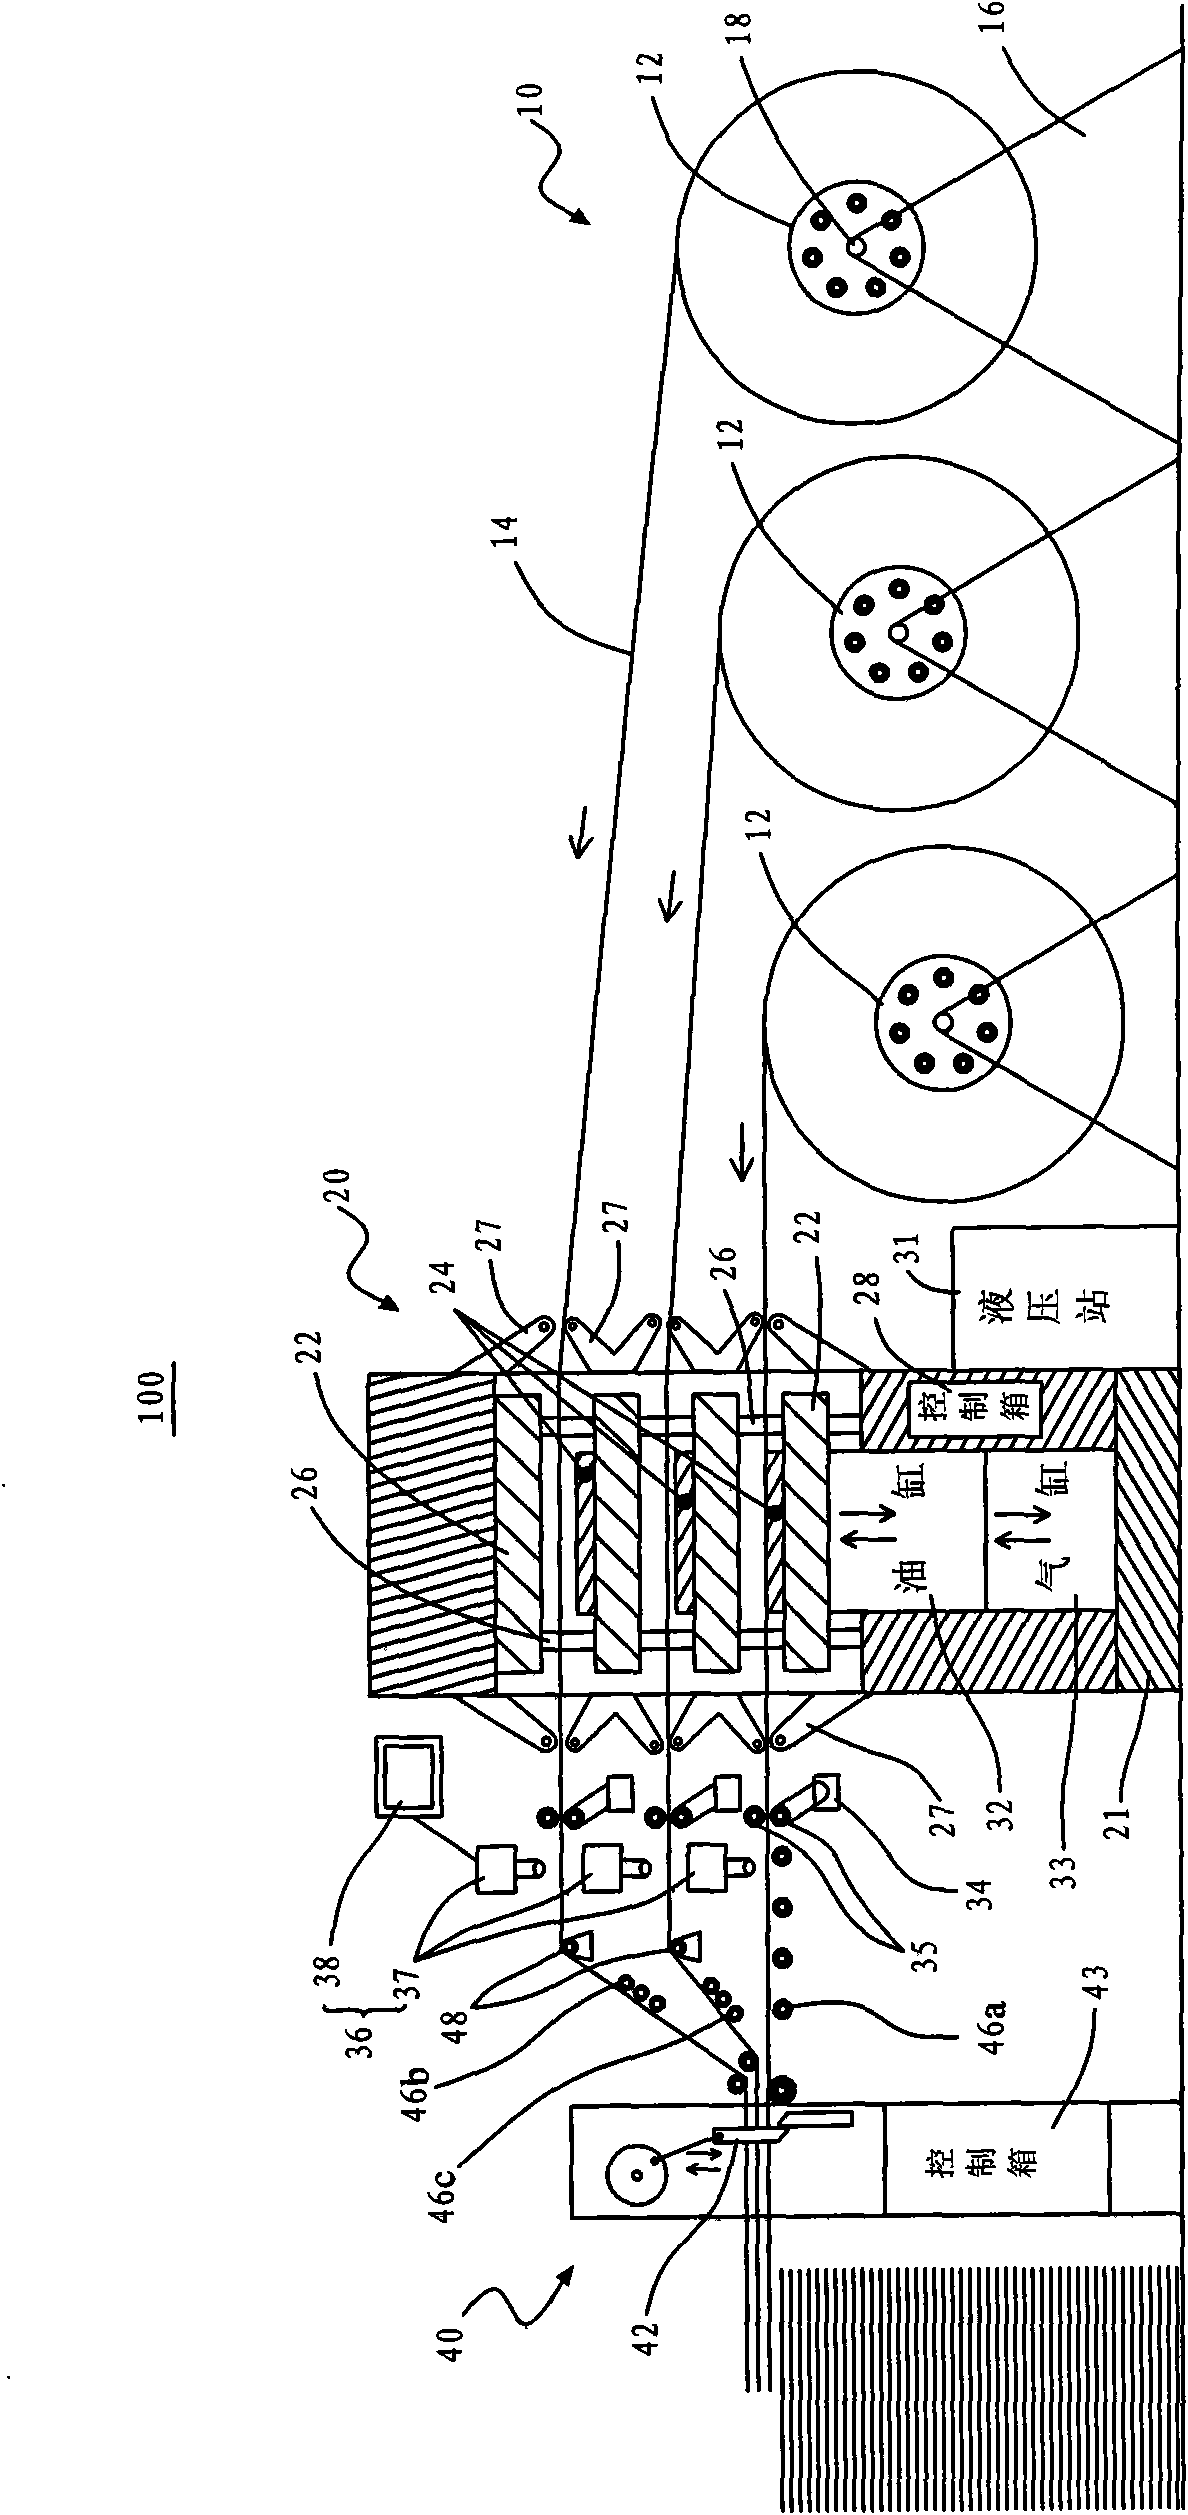 Drum-surface processing device